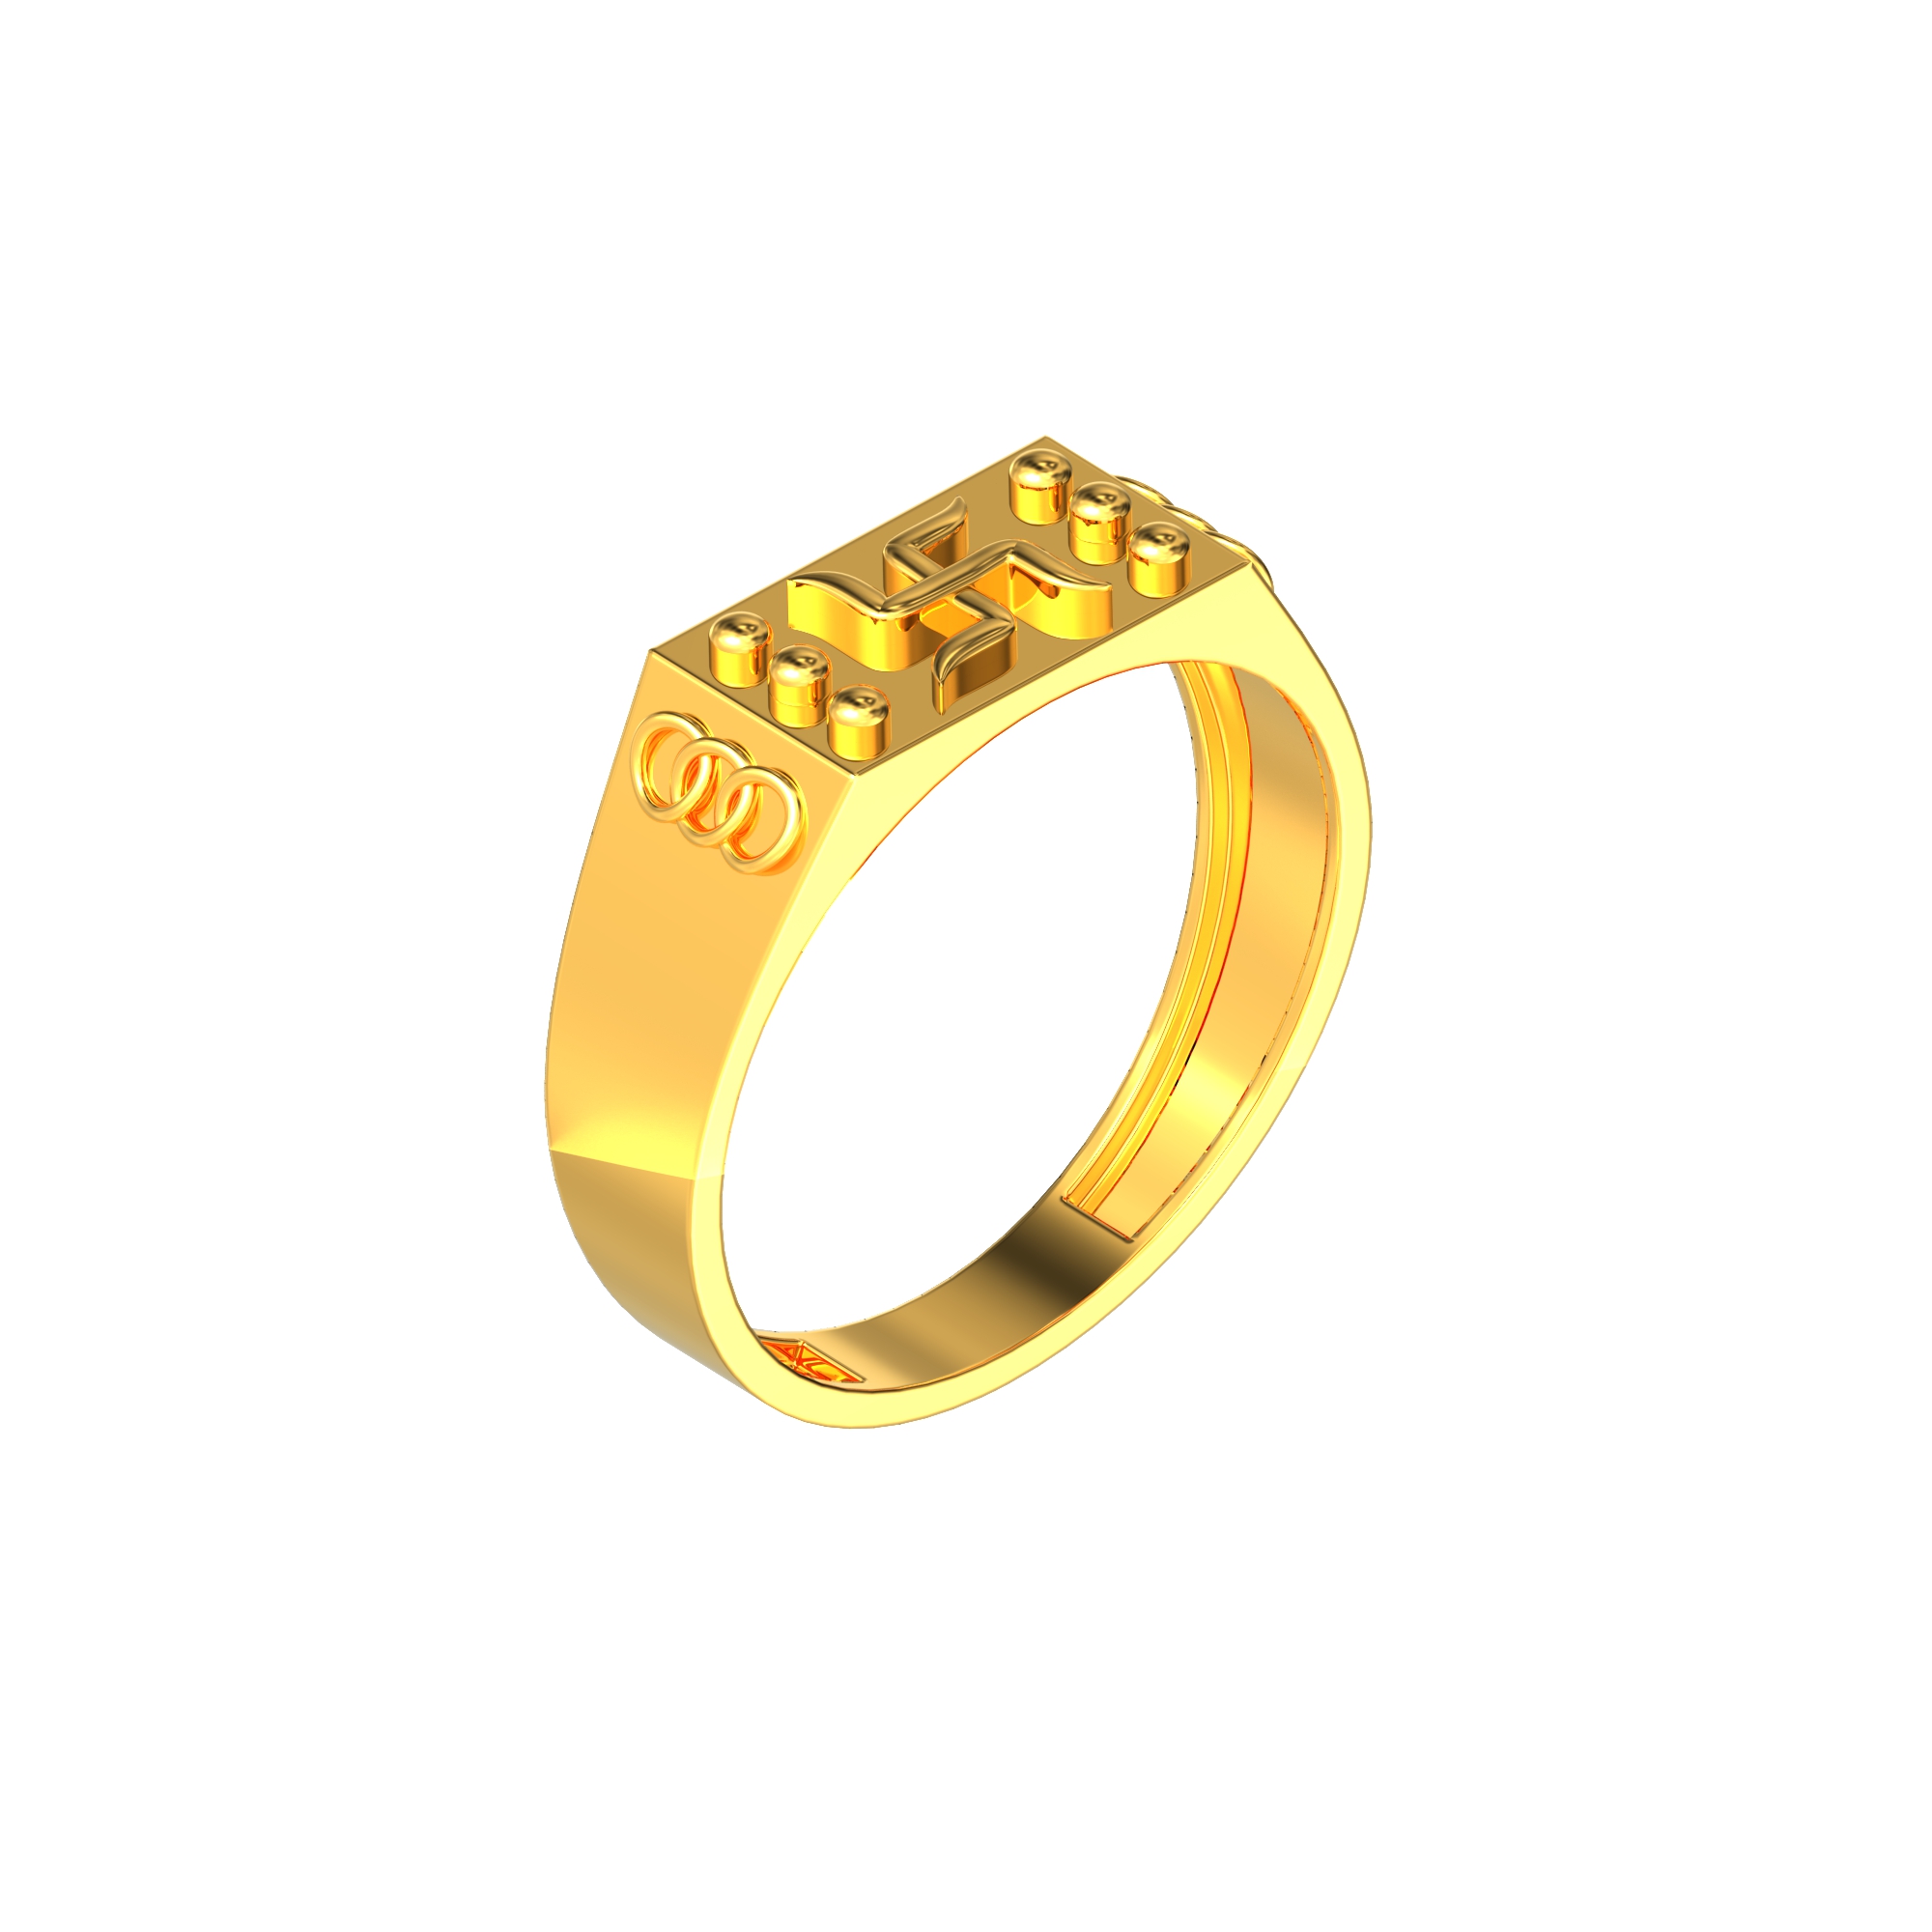 22 Carat Mens Lion Design Gold Ring, 5g at Rs 48000/piece in New Delhi |  ID: 2849902531830